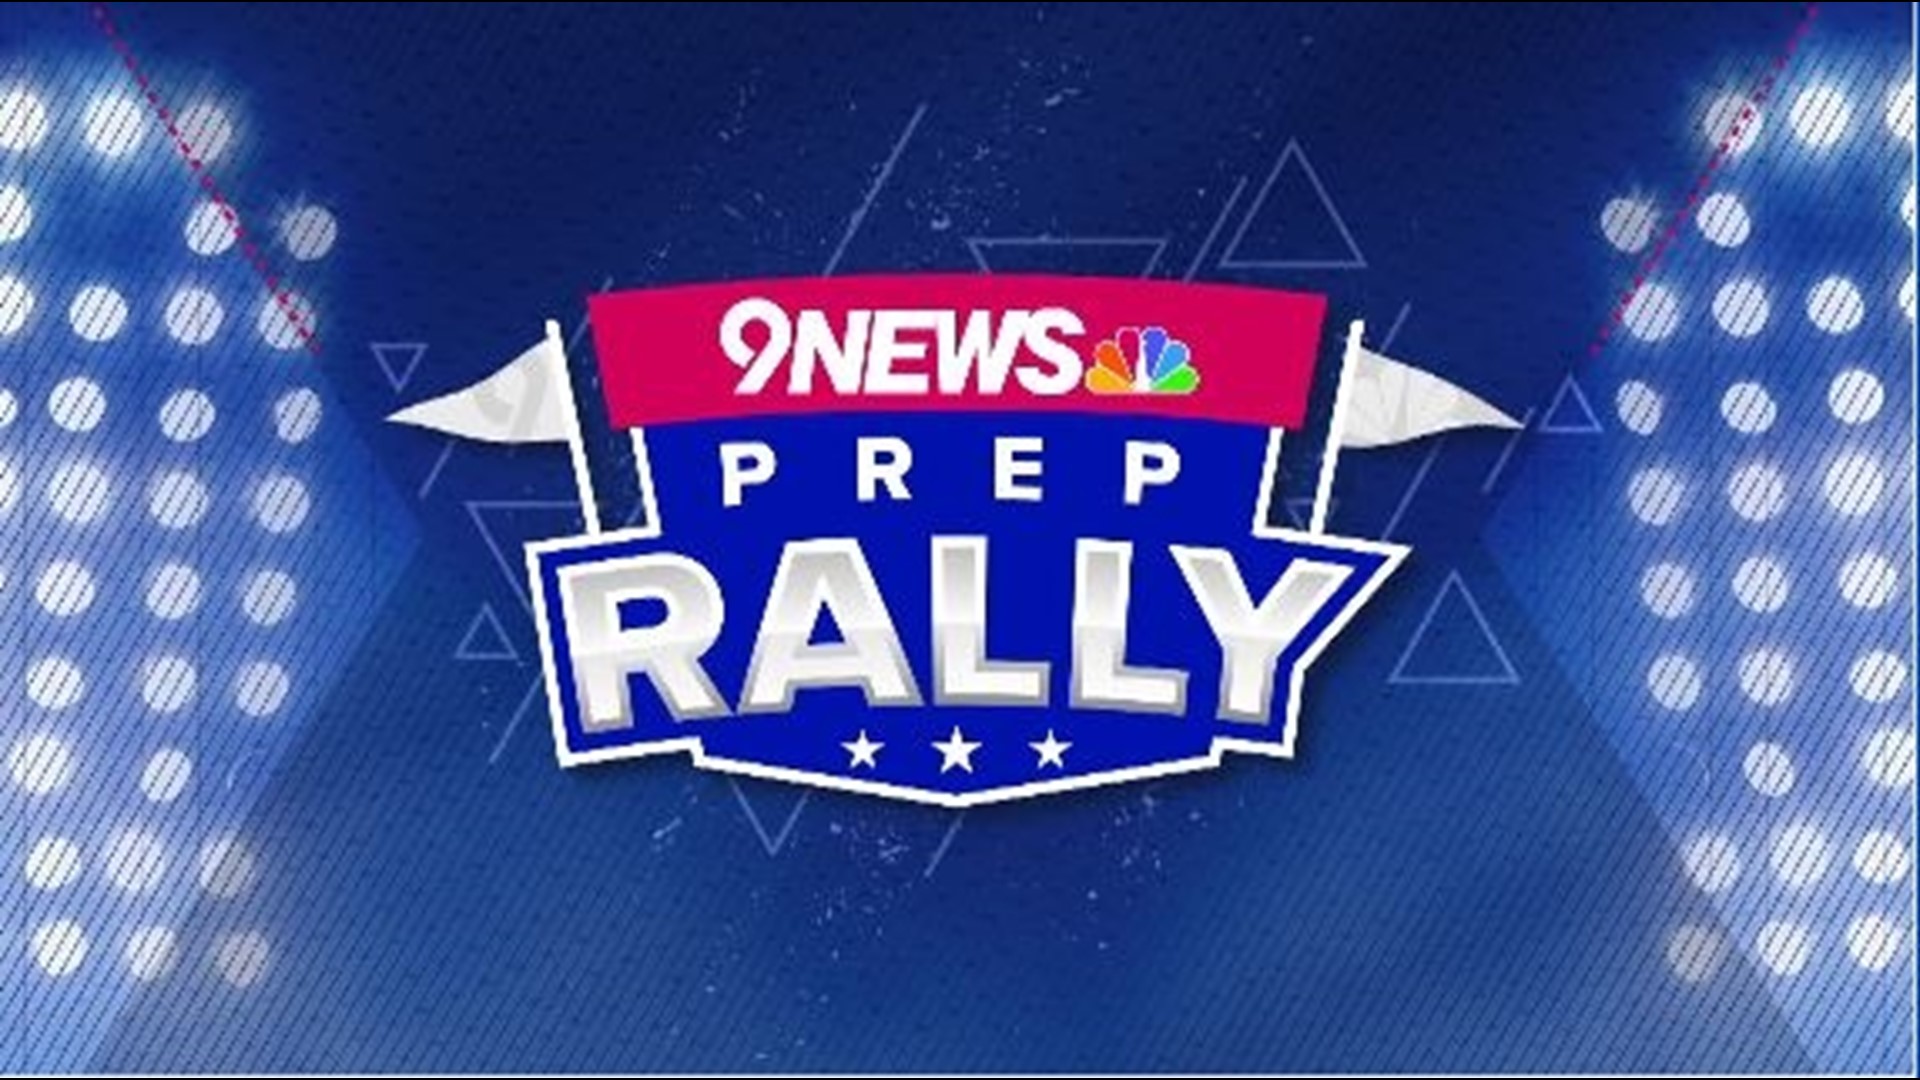 Catch up on the latest high school sports news with the 9NEWS Prep Rally